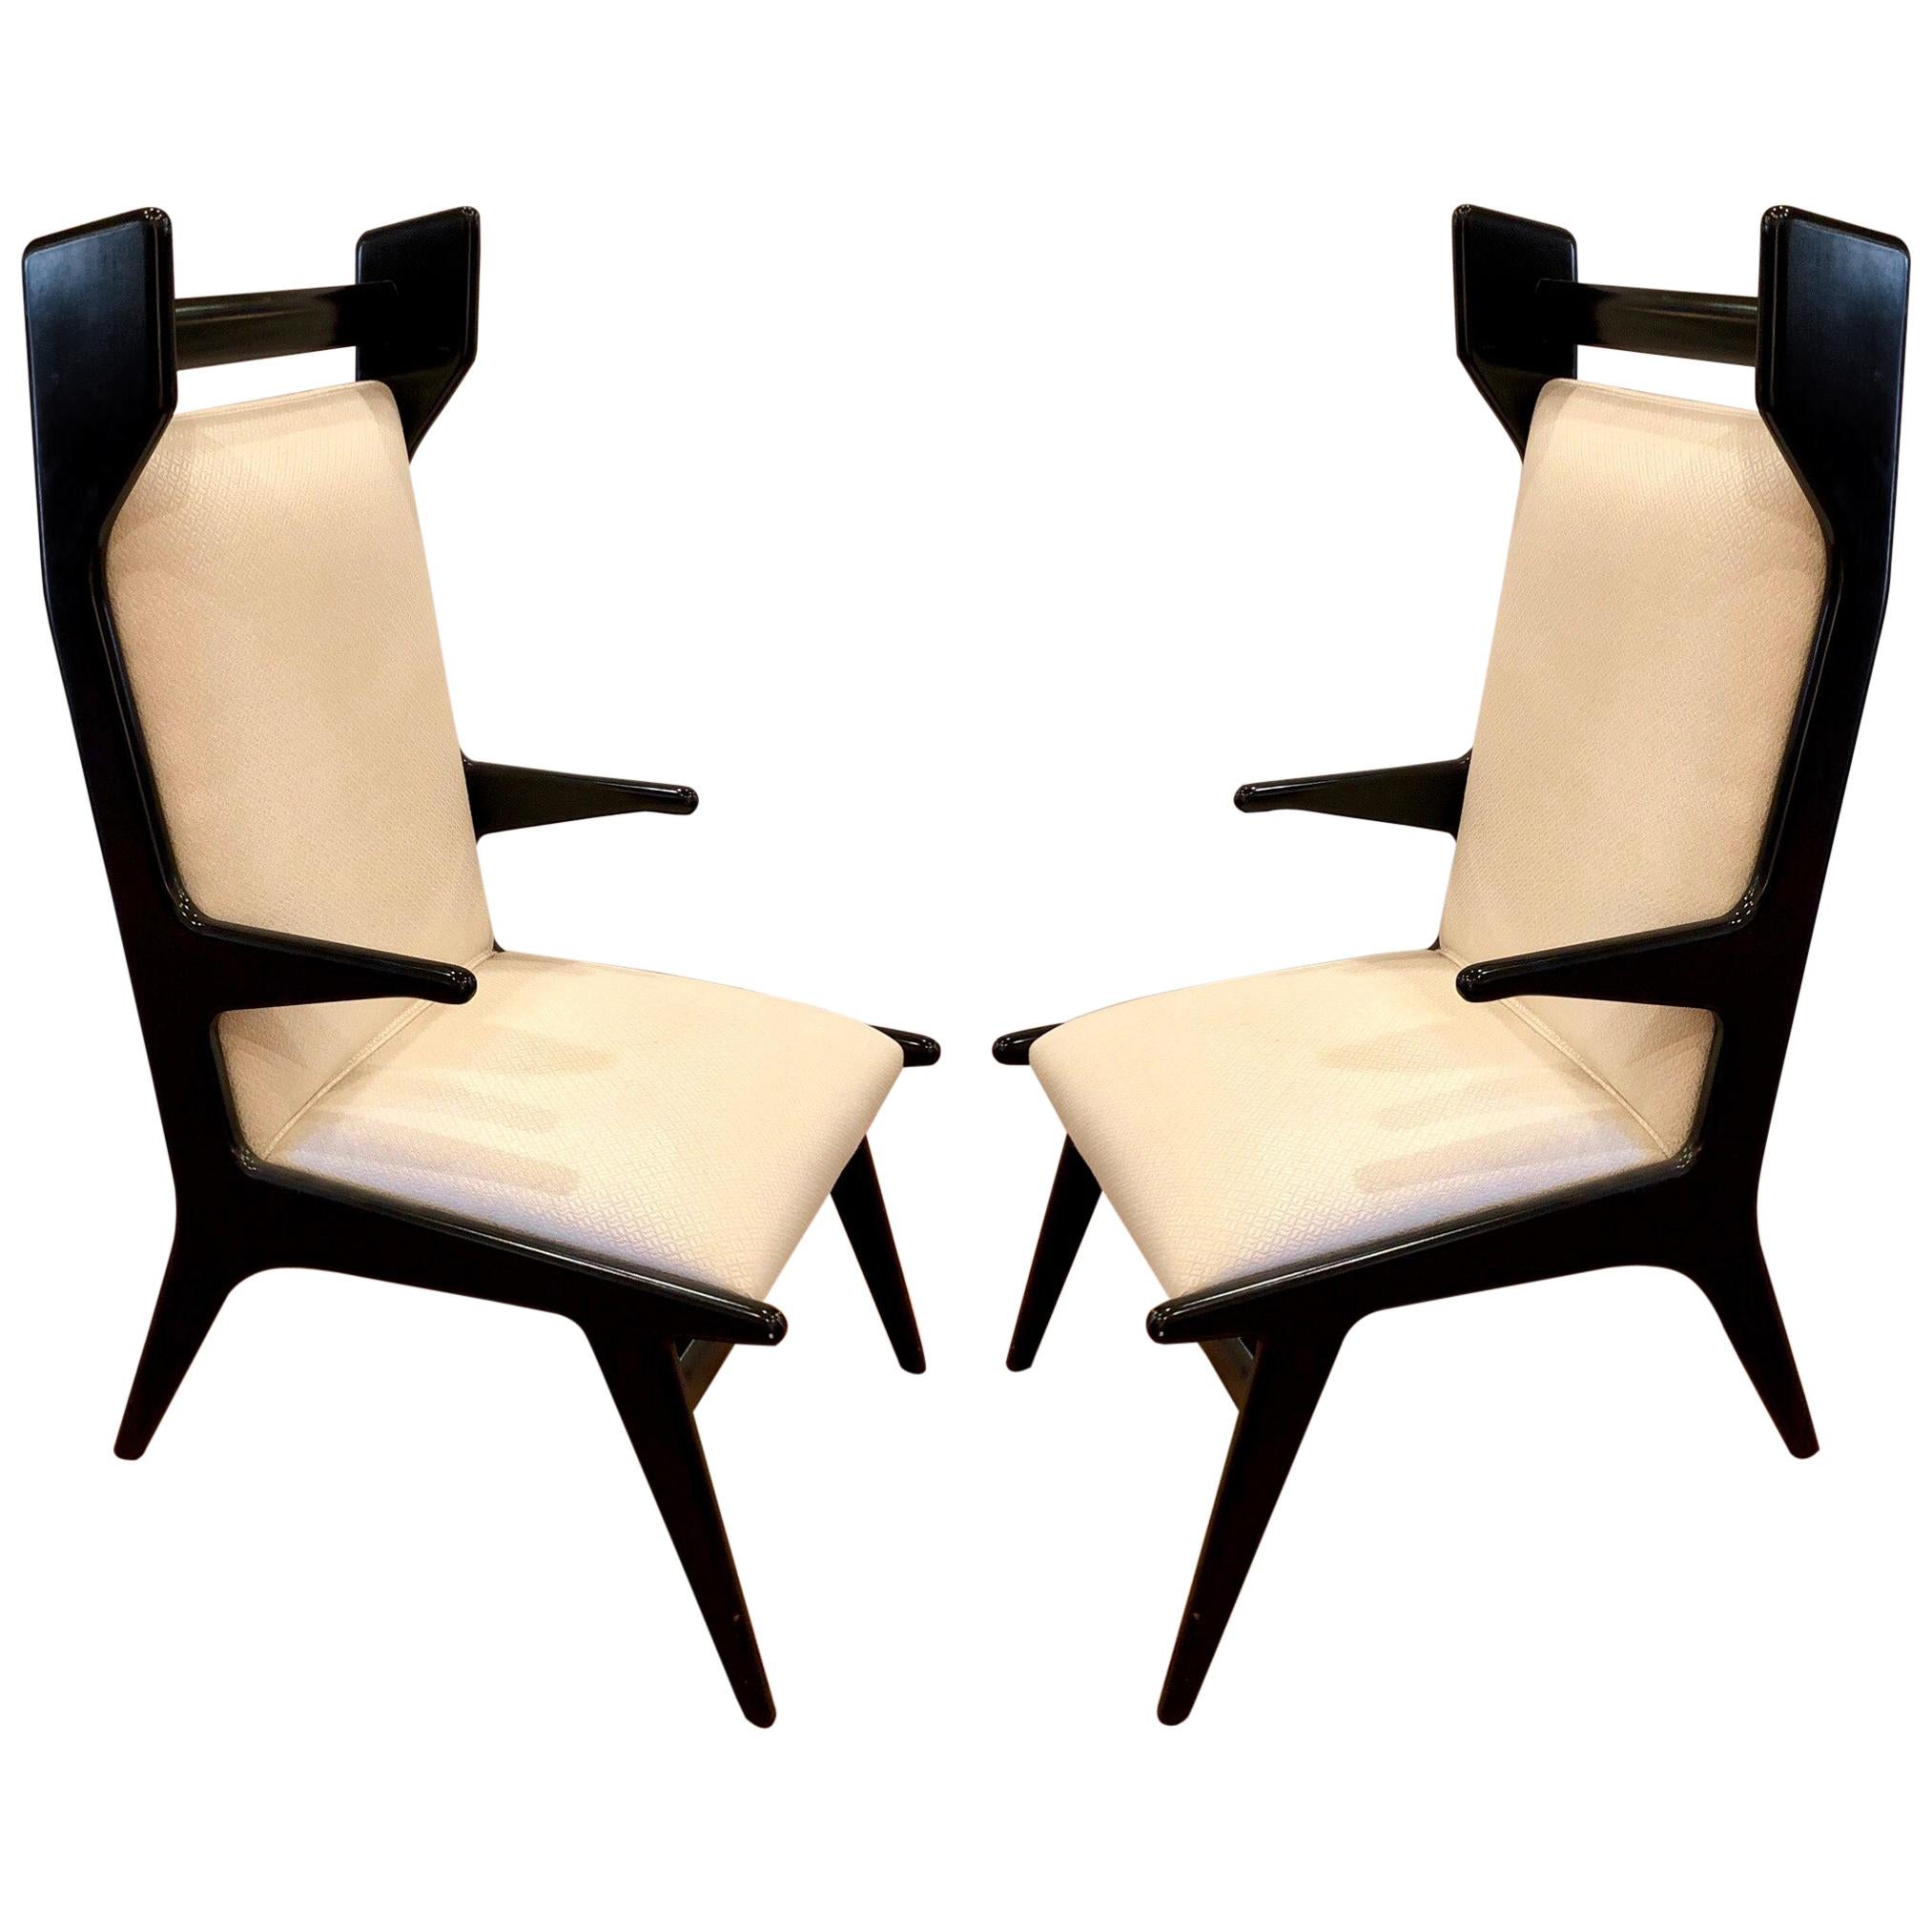 Mexican Midcentury Pair of Tall Back Chairs by Eugenio Escudero